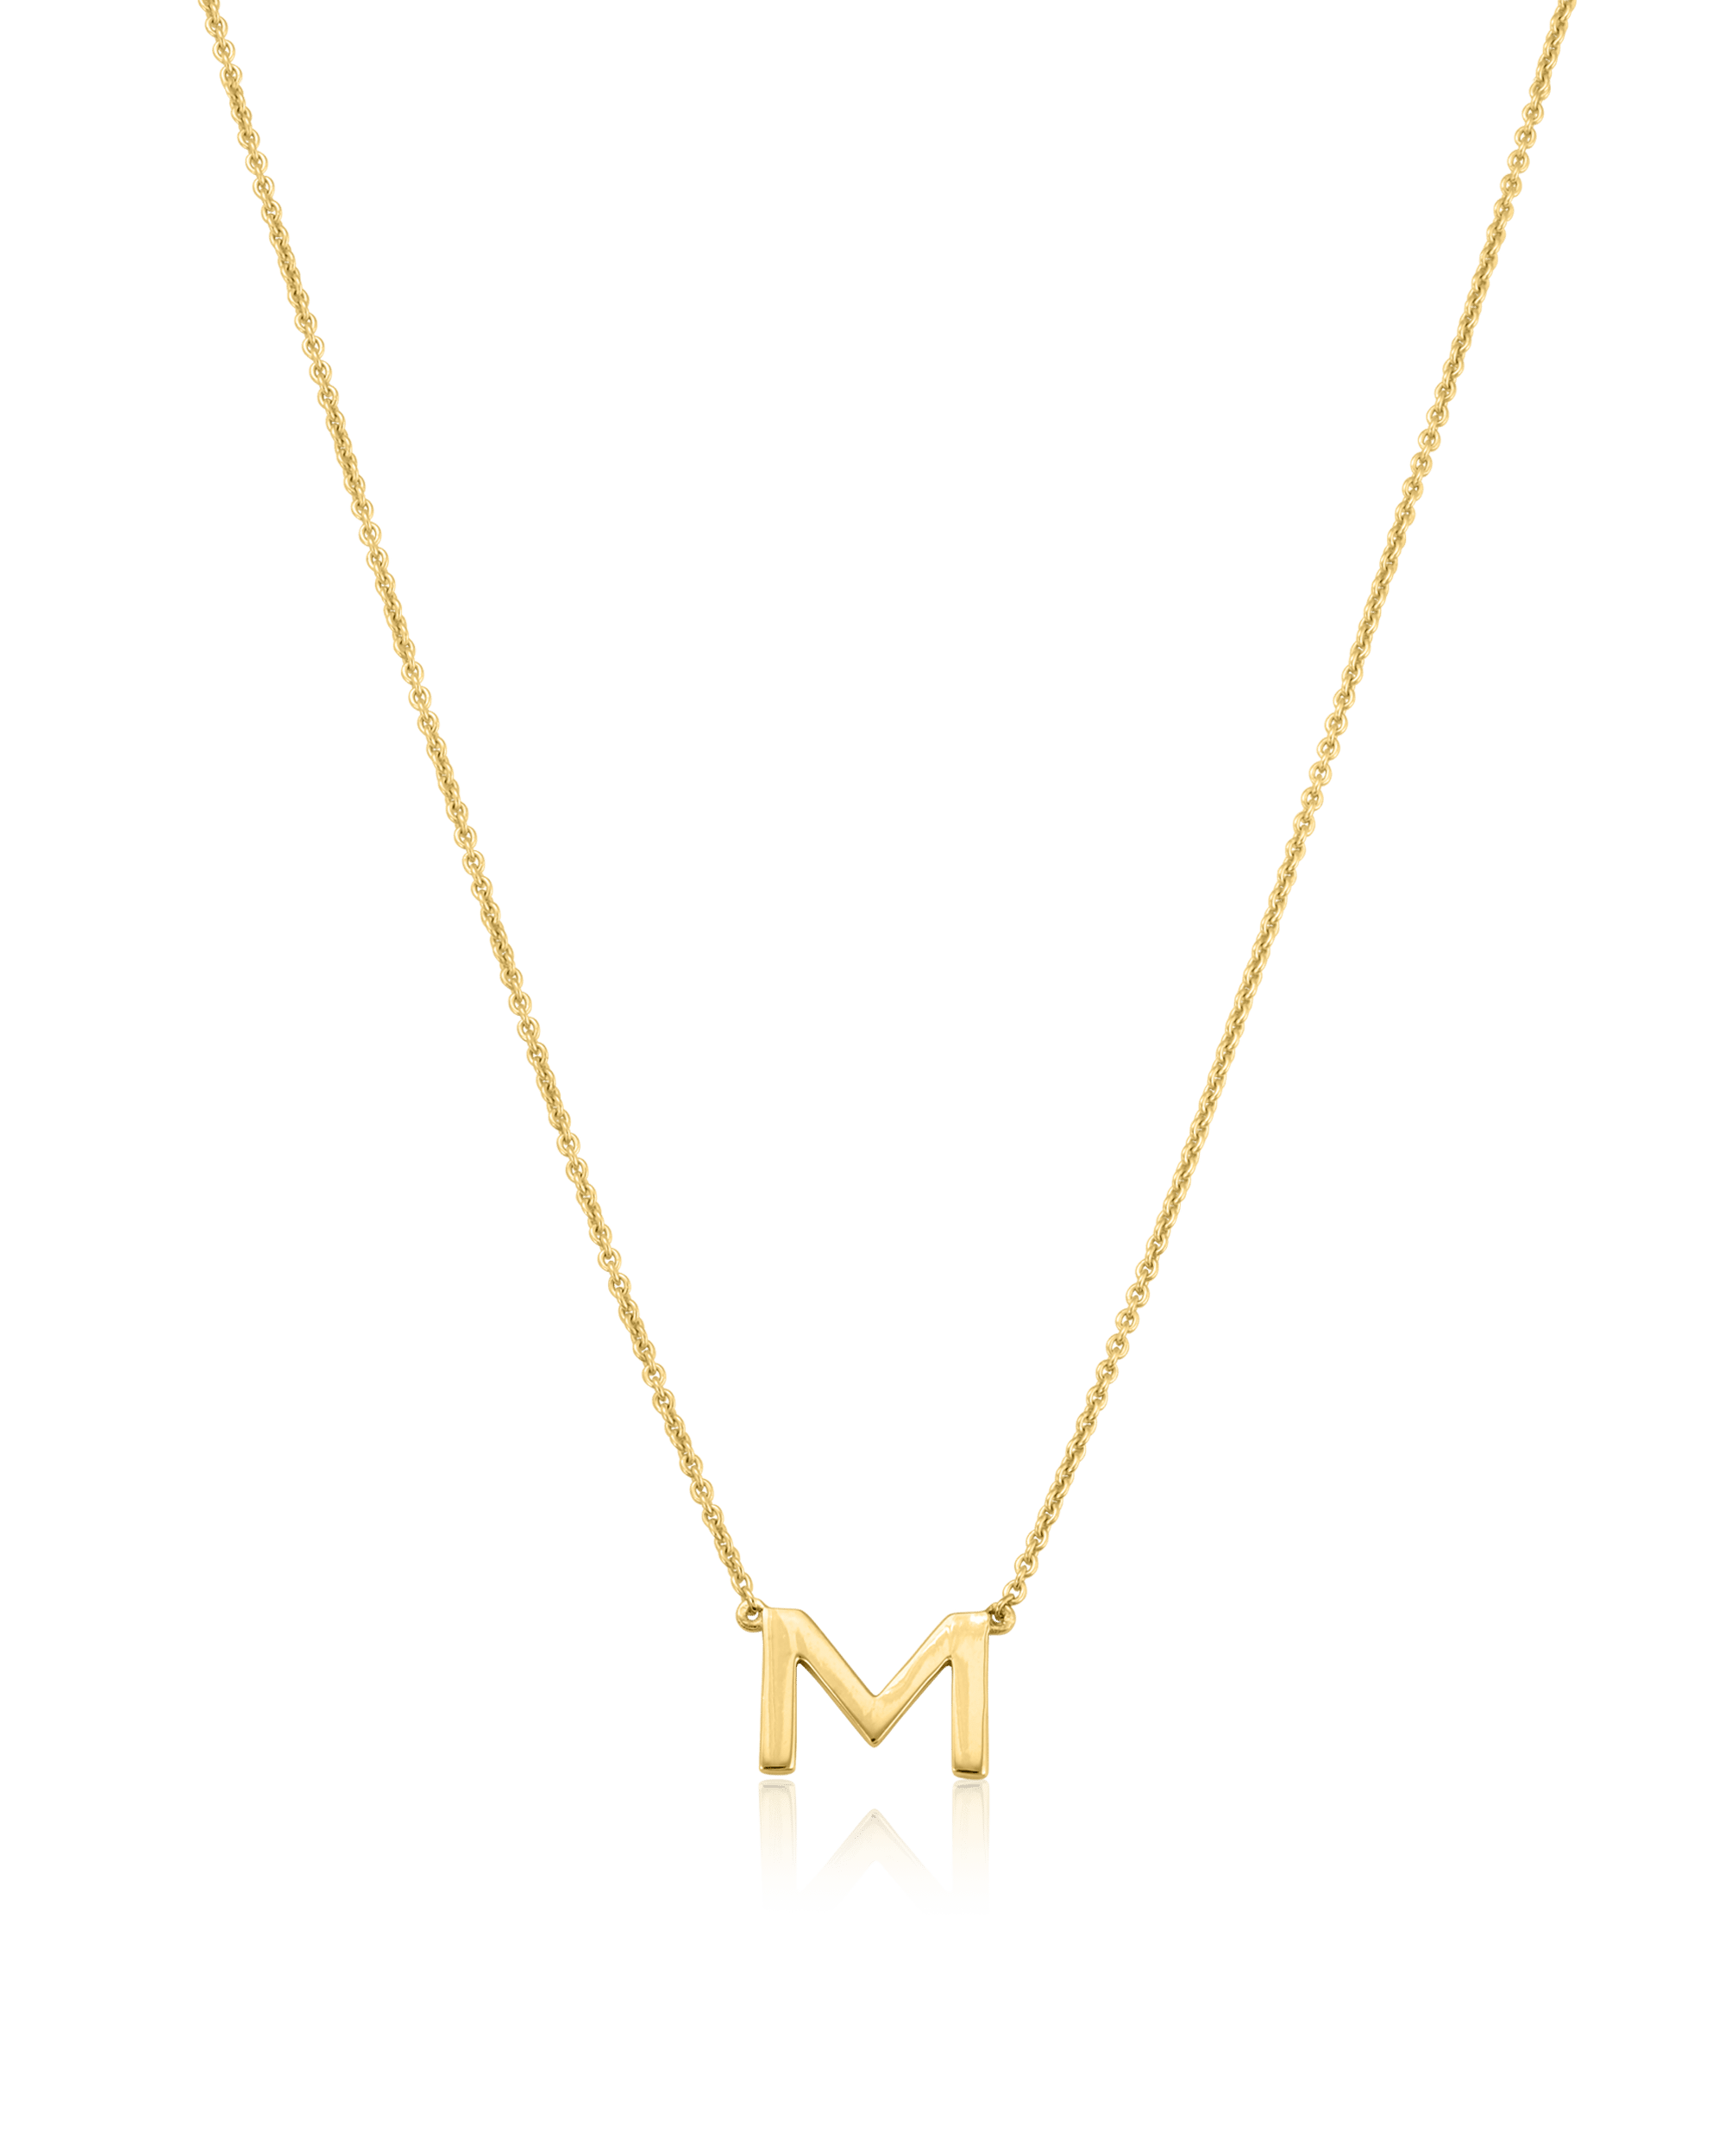 Immy Necklace - 14K White Gold Necklaces magal-dev 